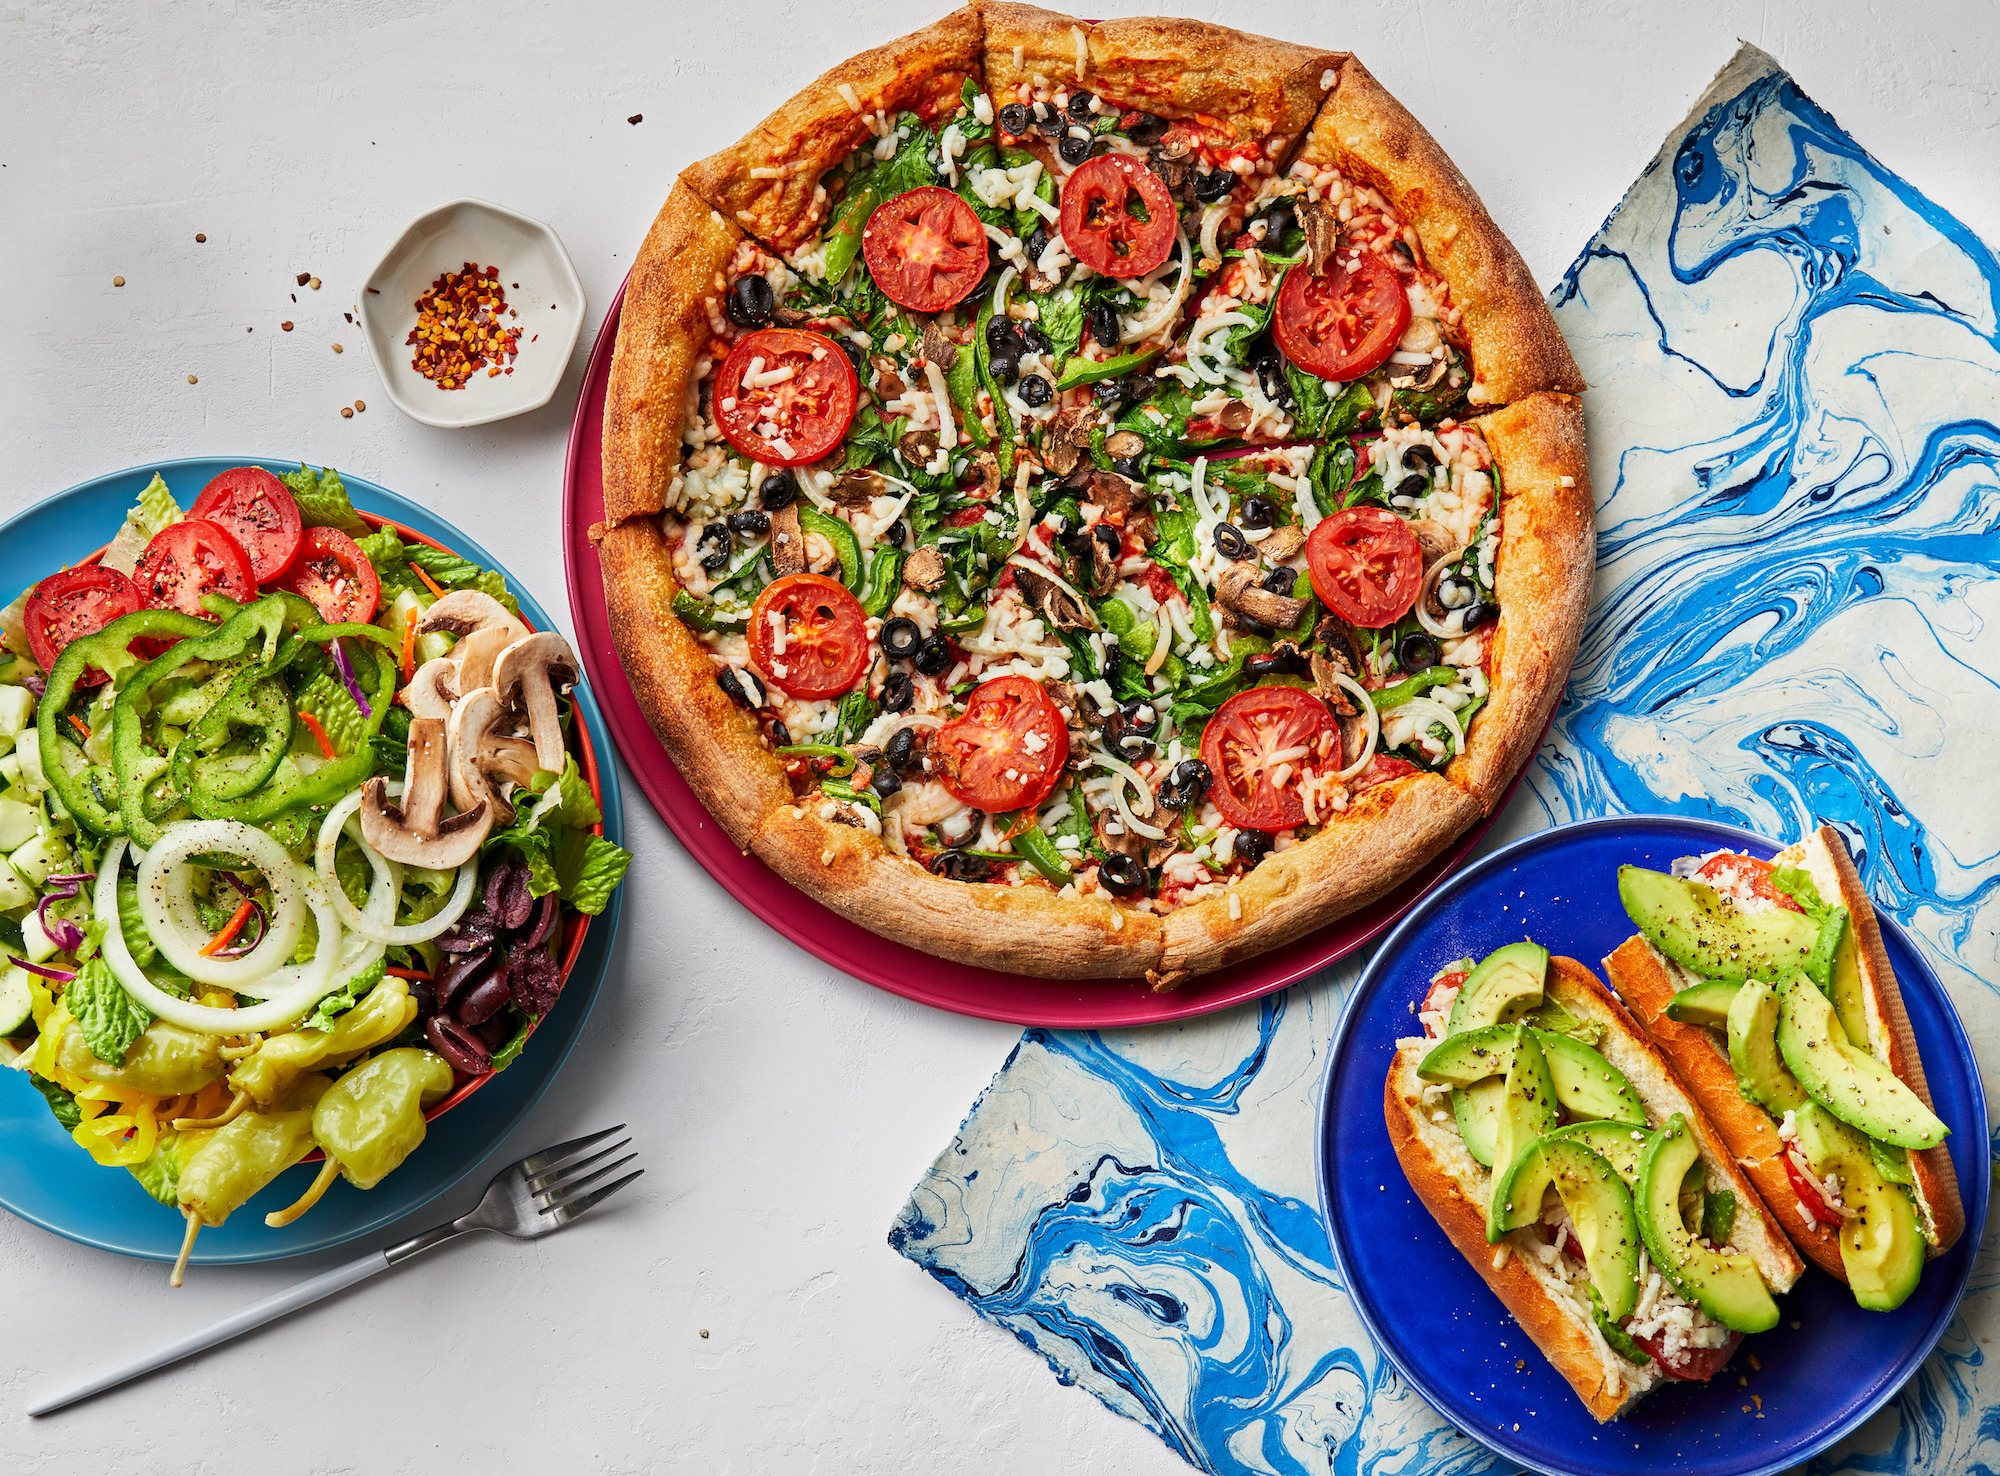 Mellow Mushroom Offers Gluten Free, Vegan and Keto-Friendly Menu Items to Start Off the New Year